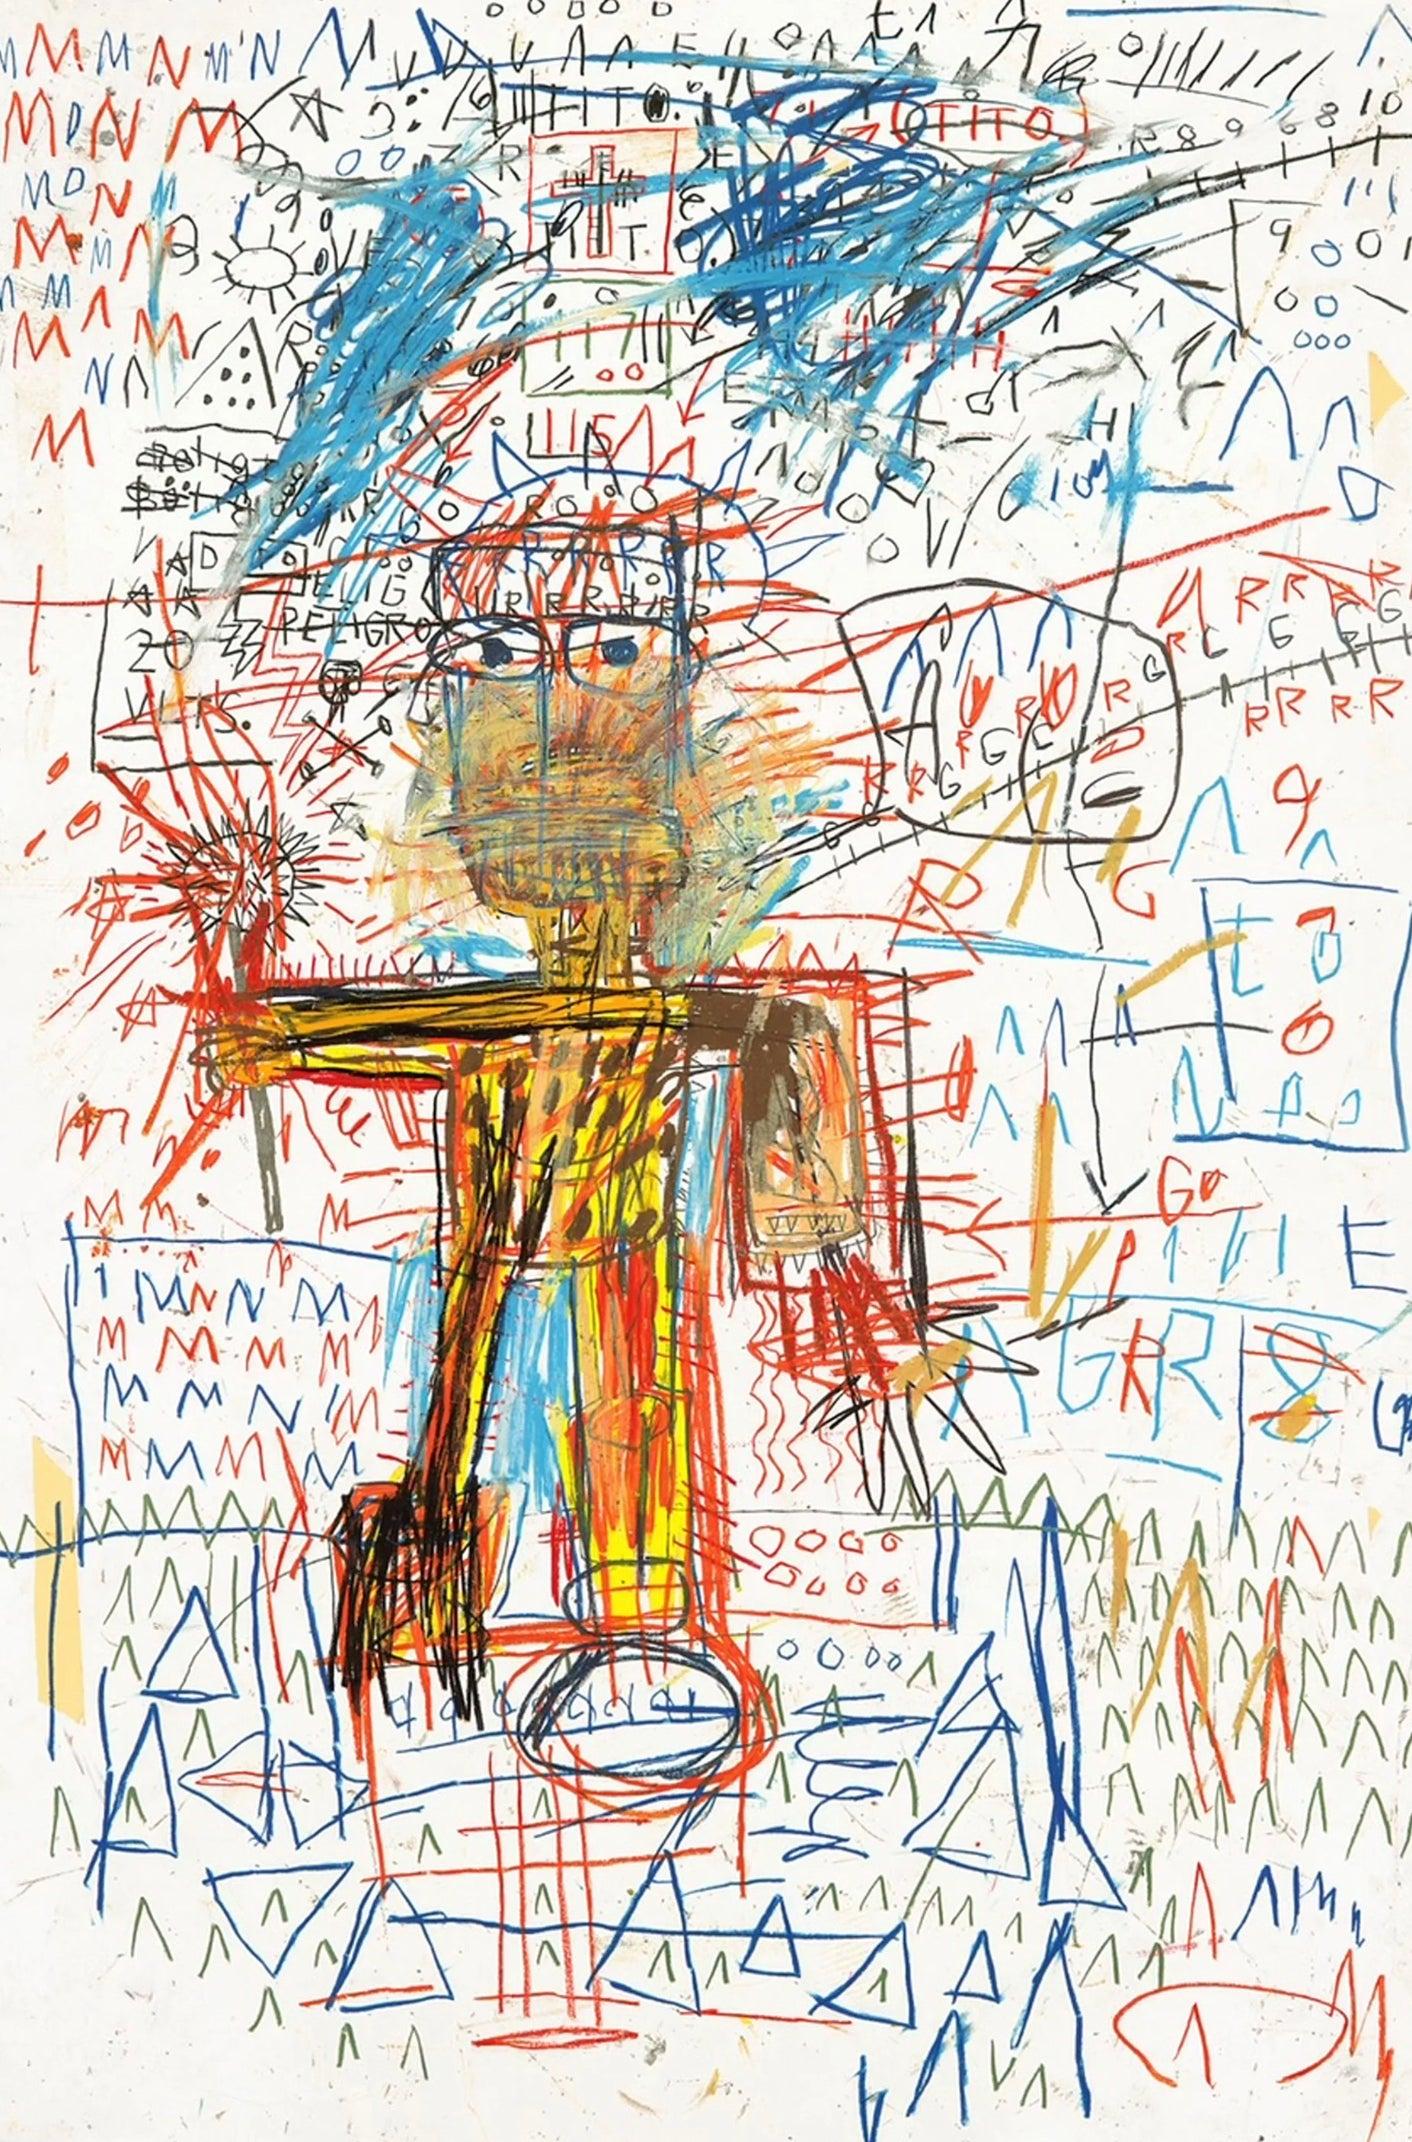 what mediums did basquiat use